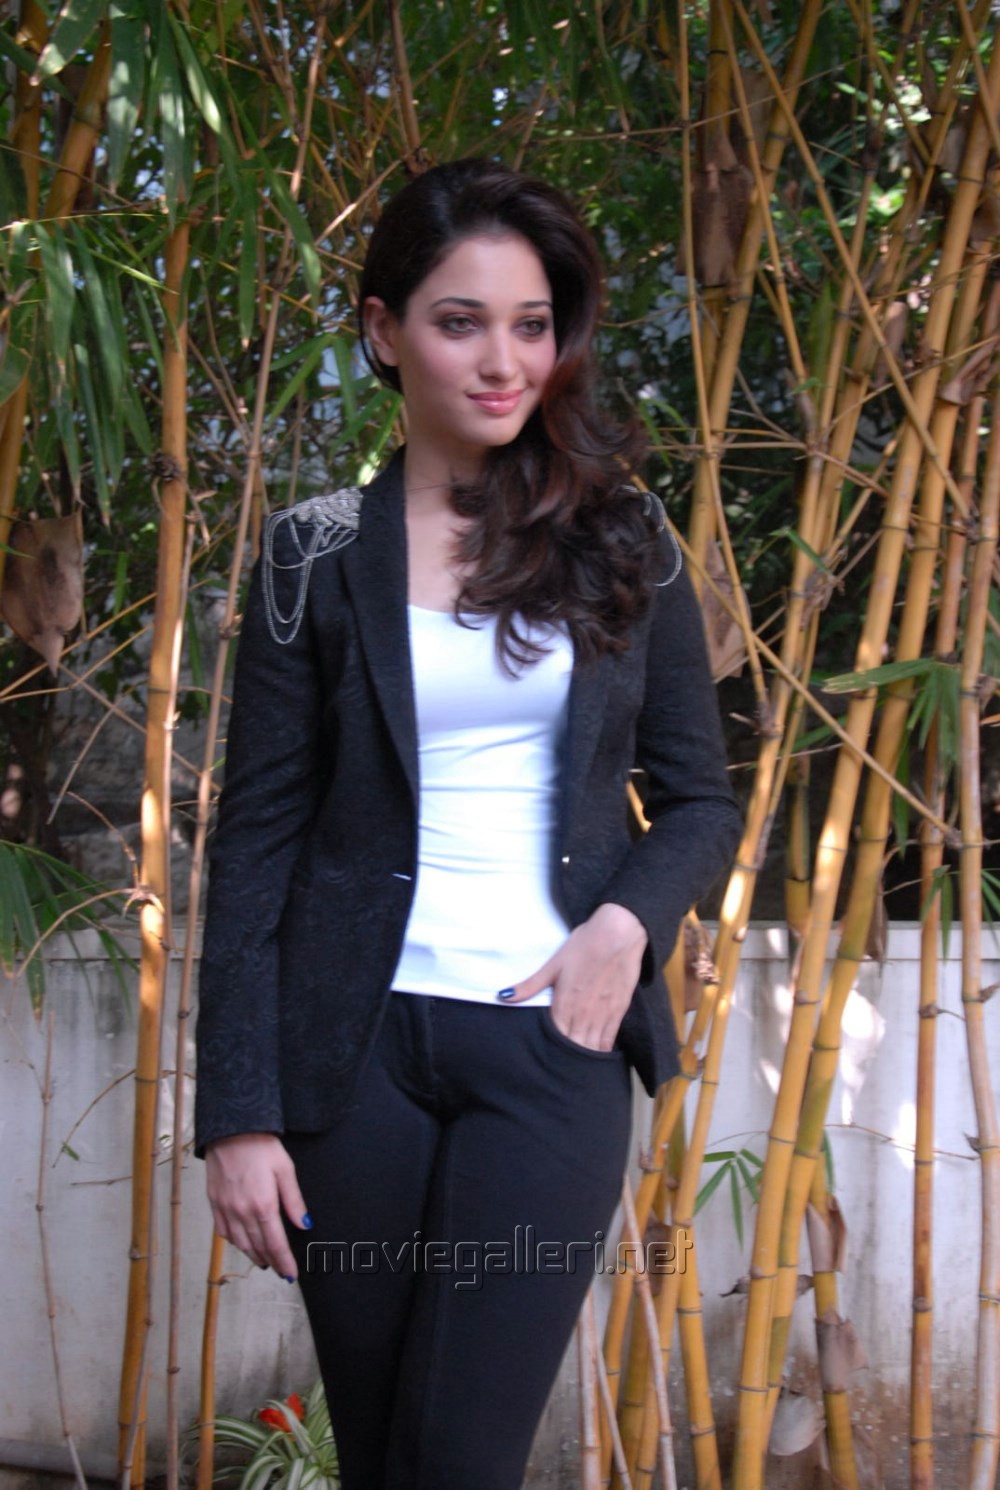 Beautiful Tamanna Cute Images in Women Office Suit | Moviegalleri.net